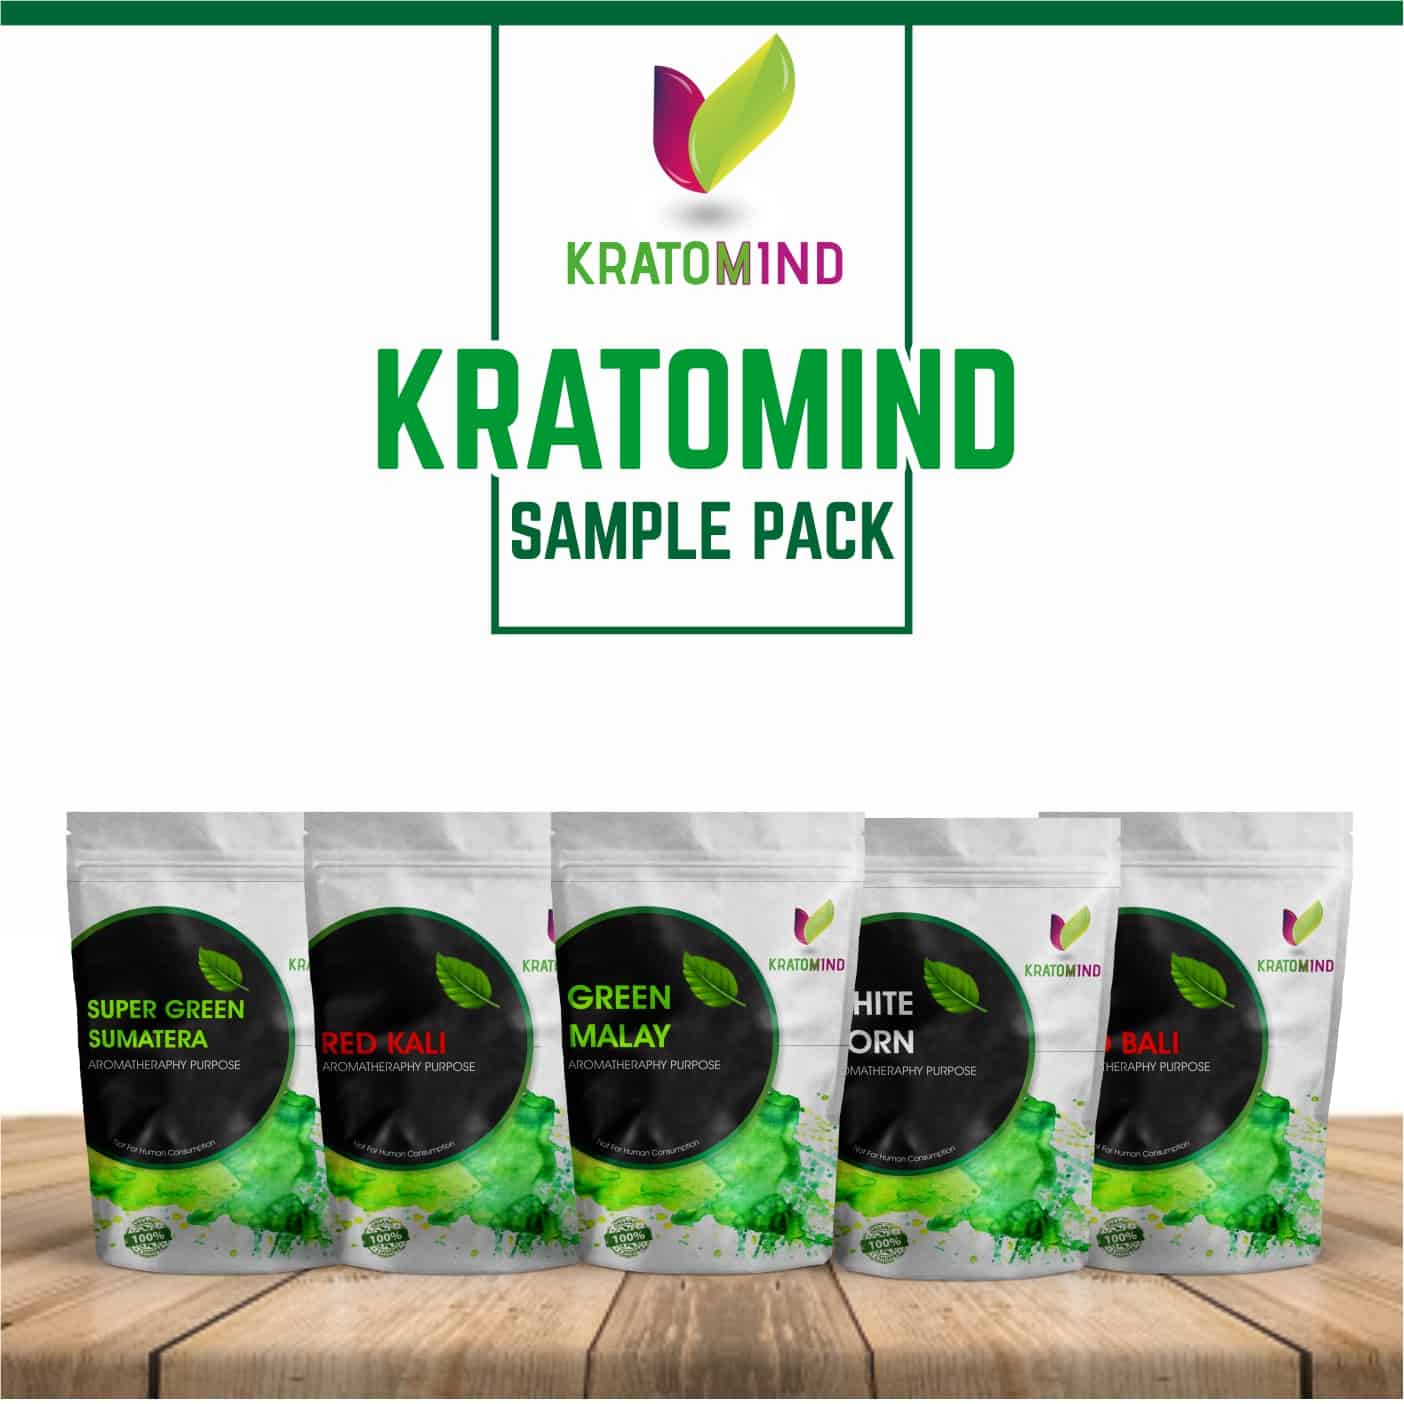 The Benefits of Kratom Products